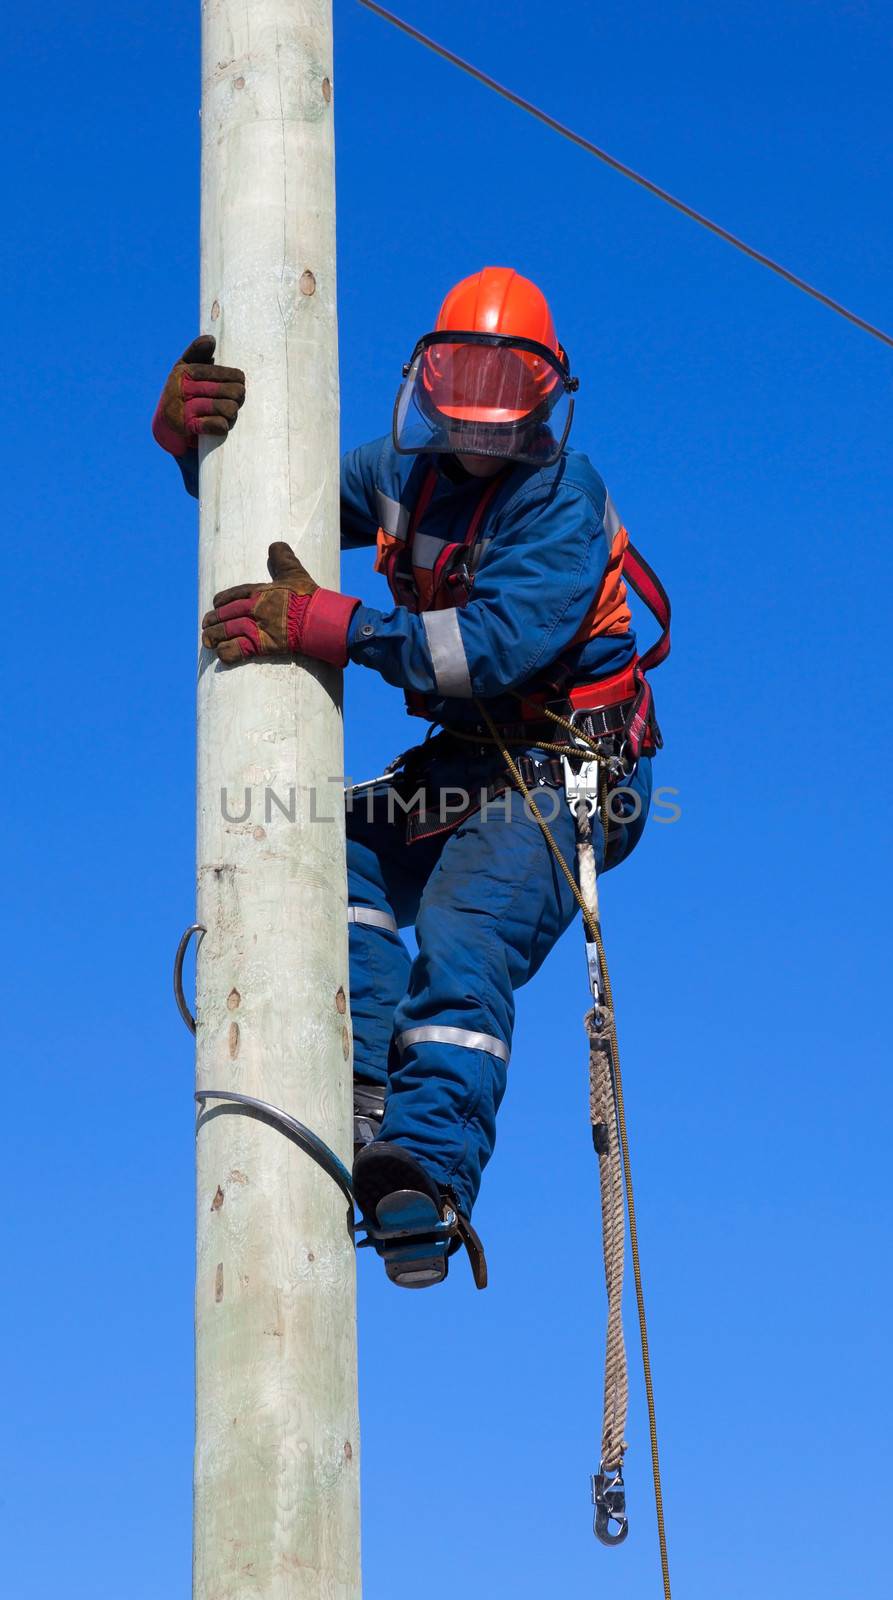 
Electrician climbs the pole power lines against the blue sky
